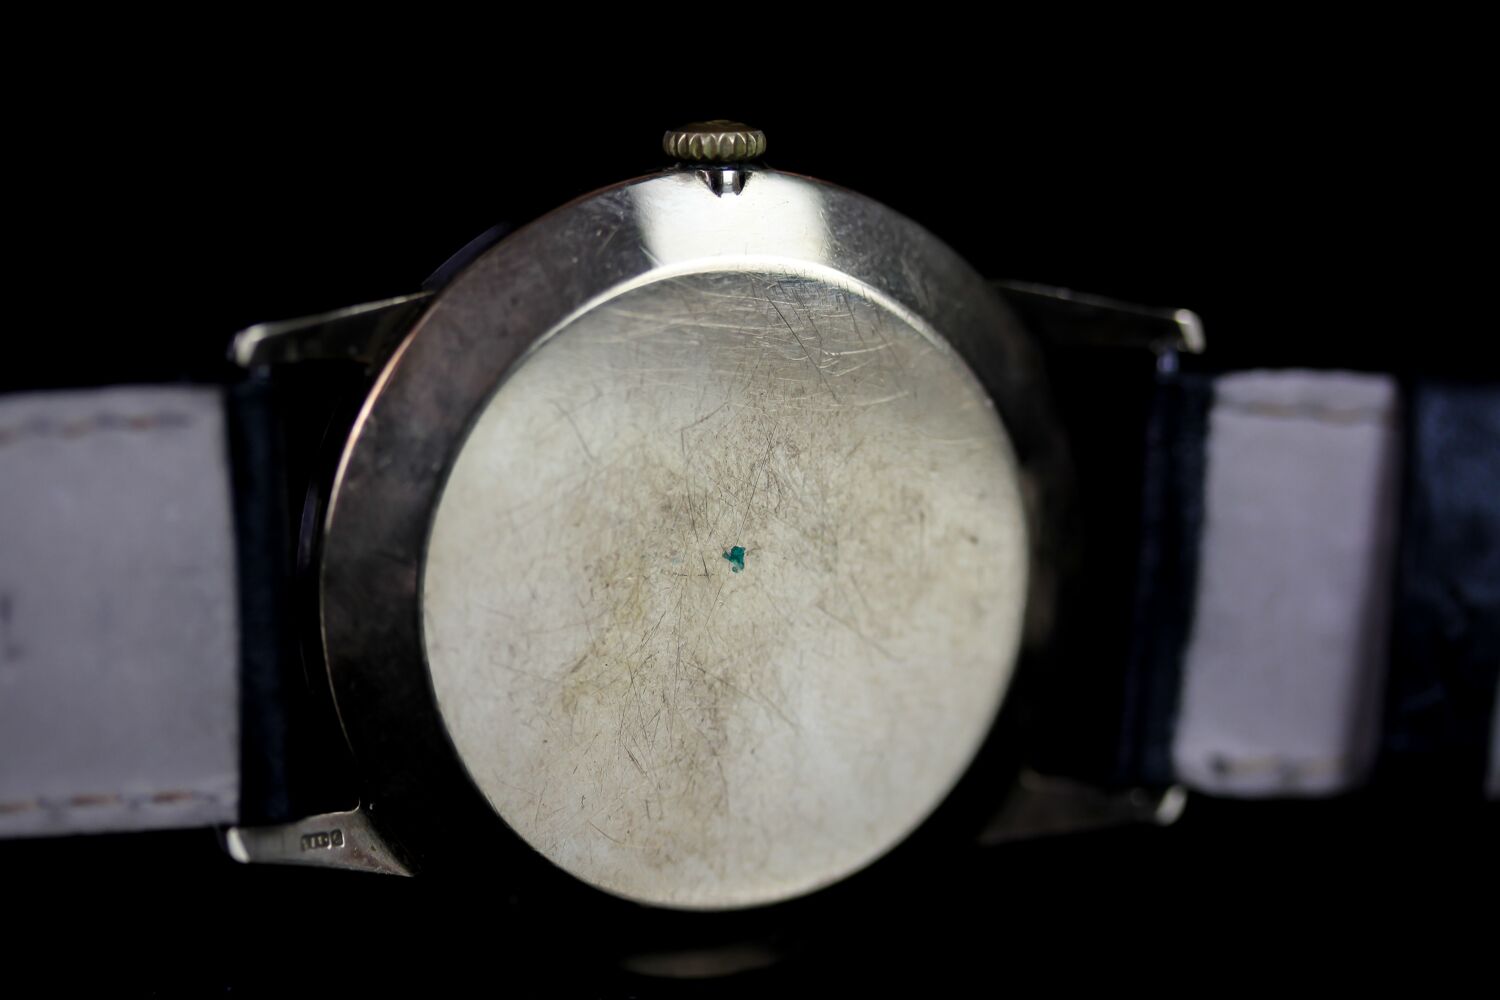 GENTLEMENS TISSOT VISODATE WRISTWATCH, circular silver dial with hour markers, date at 3 0'clock, - Image 2 of 2